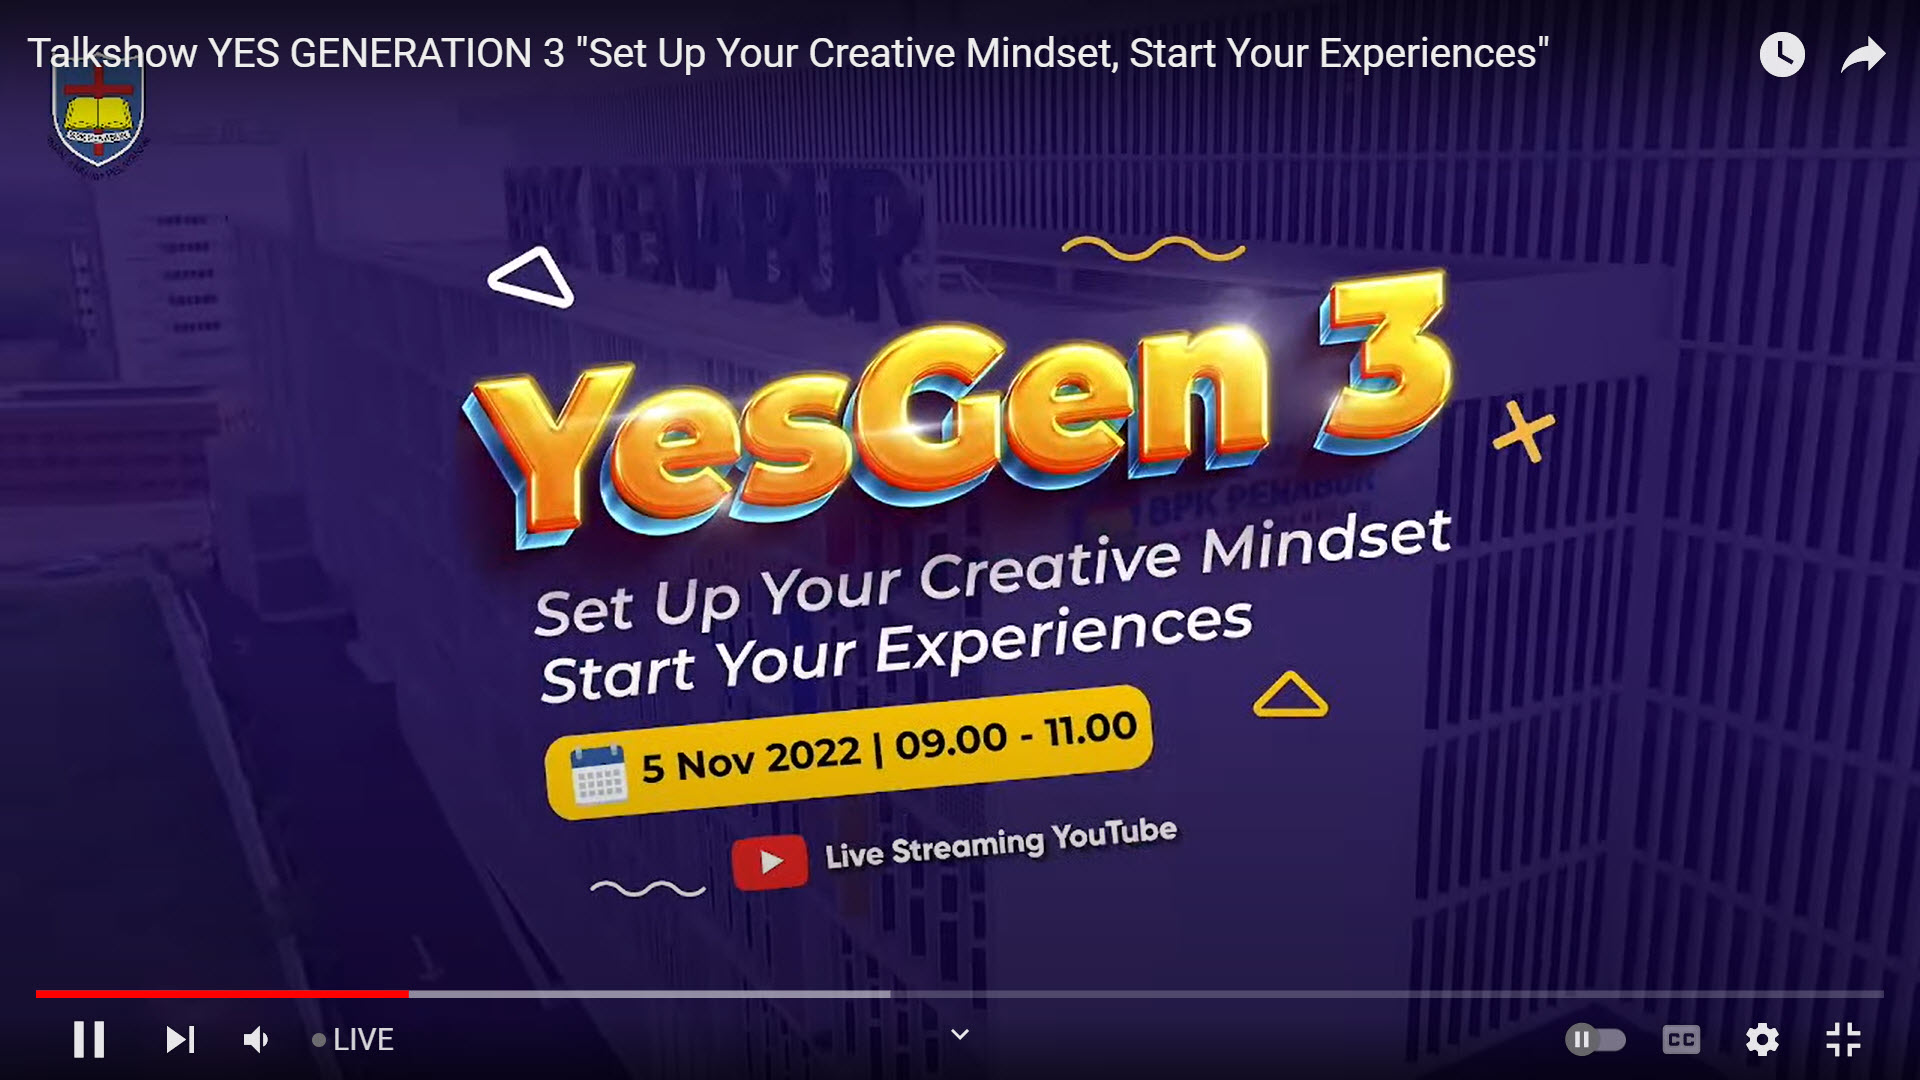 Talkshow YES GENERATION 3 "Set Up Your Creative Mindset, Start Your Experiences" (1)